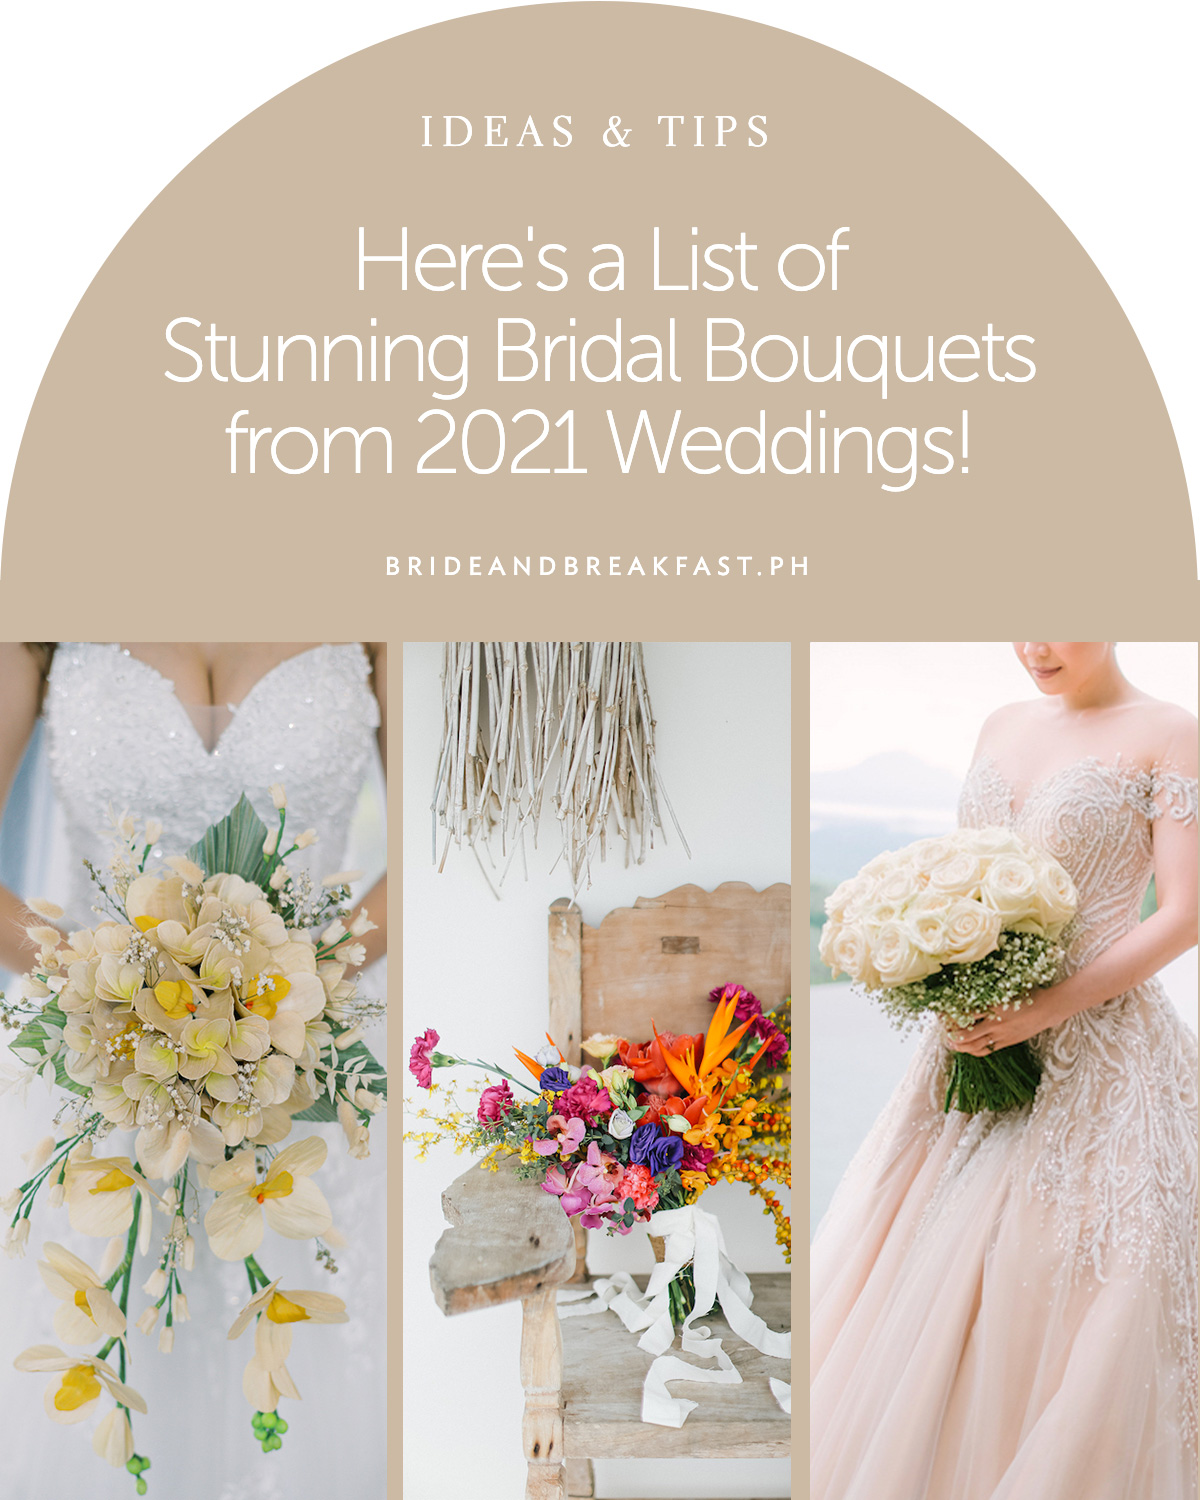 Here's a List of Stunning Bridal Bouquets from 2021 Weddings!